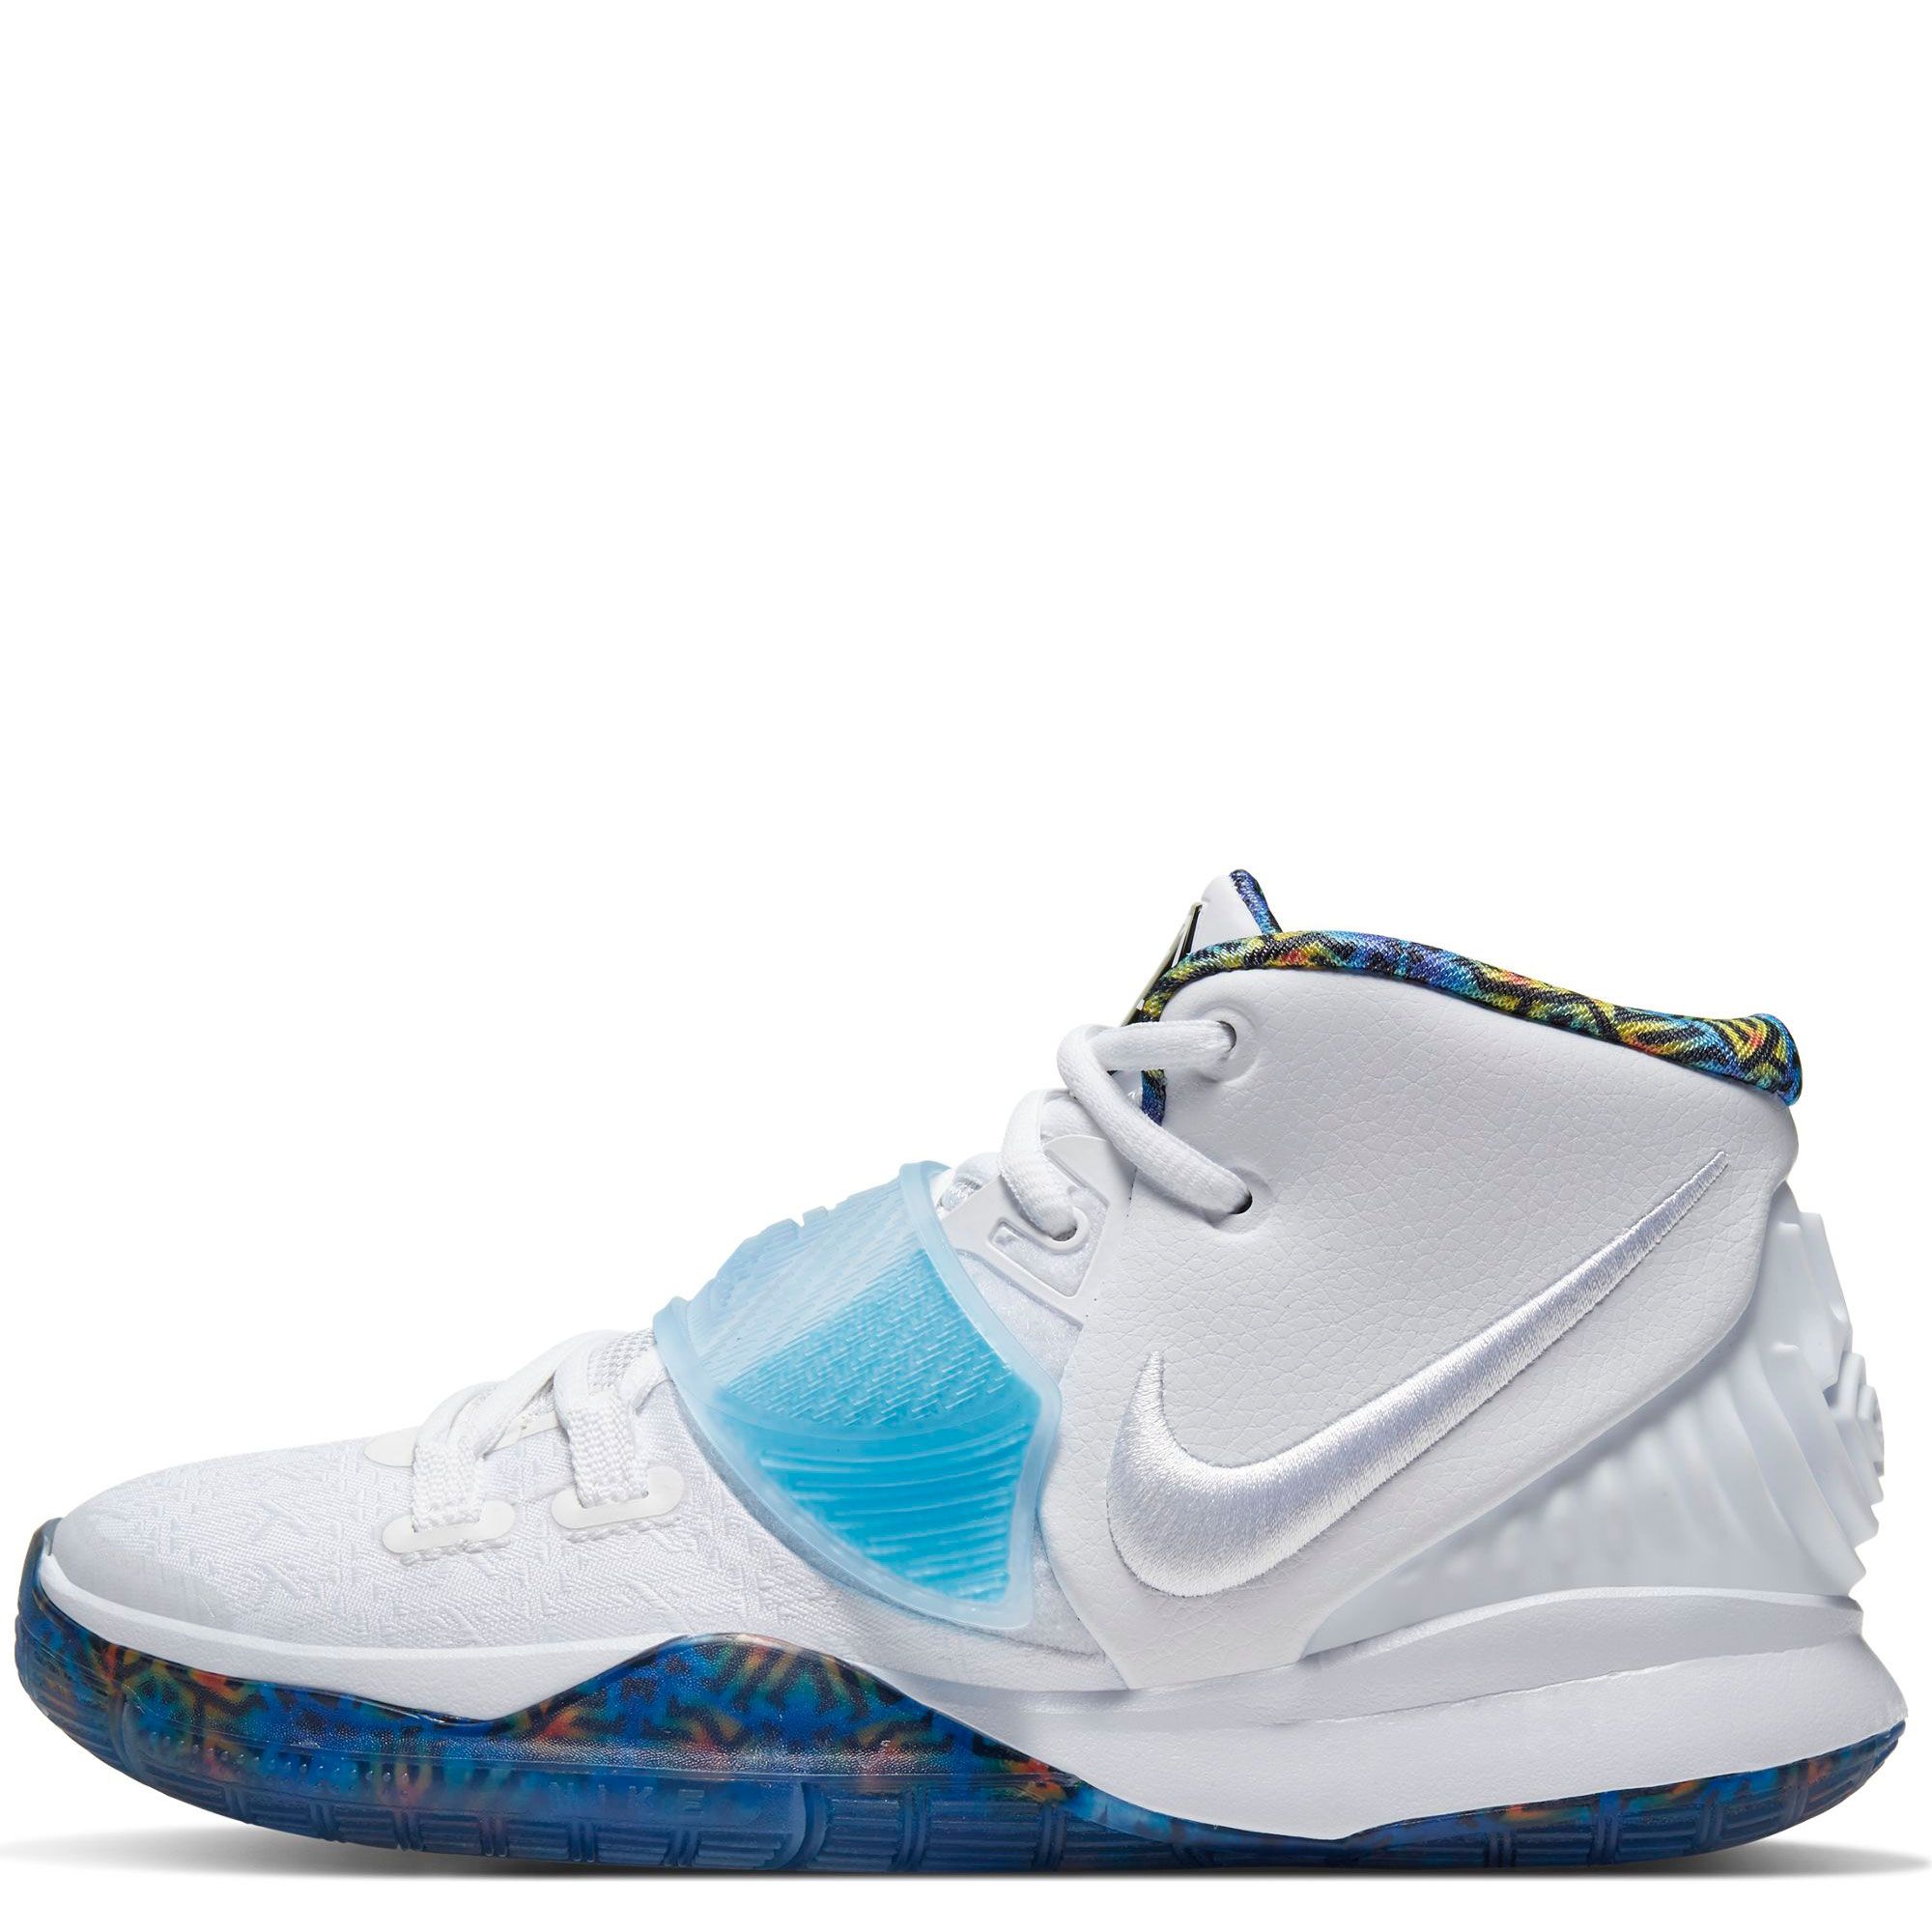 kyrie 6 blue and white cheap online